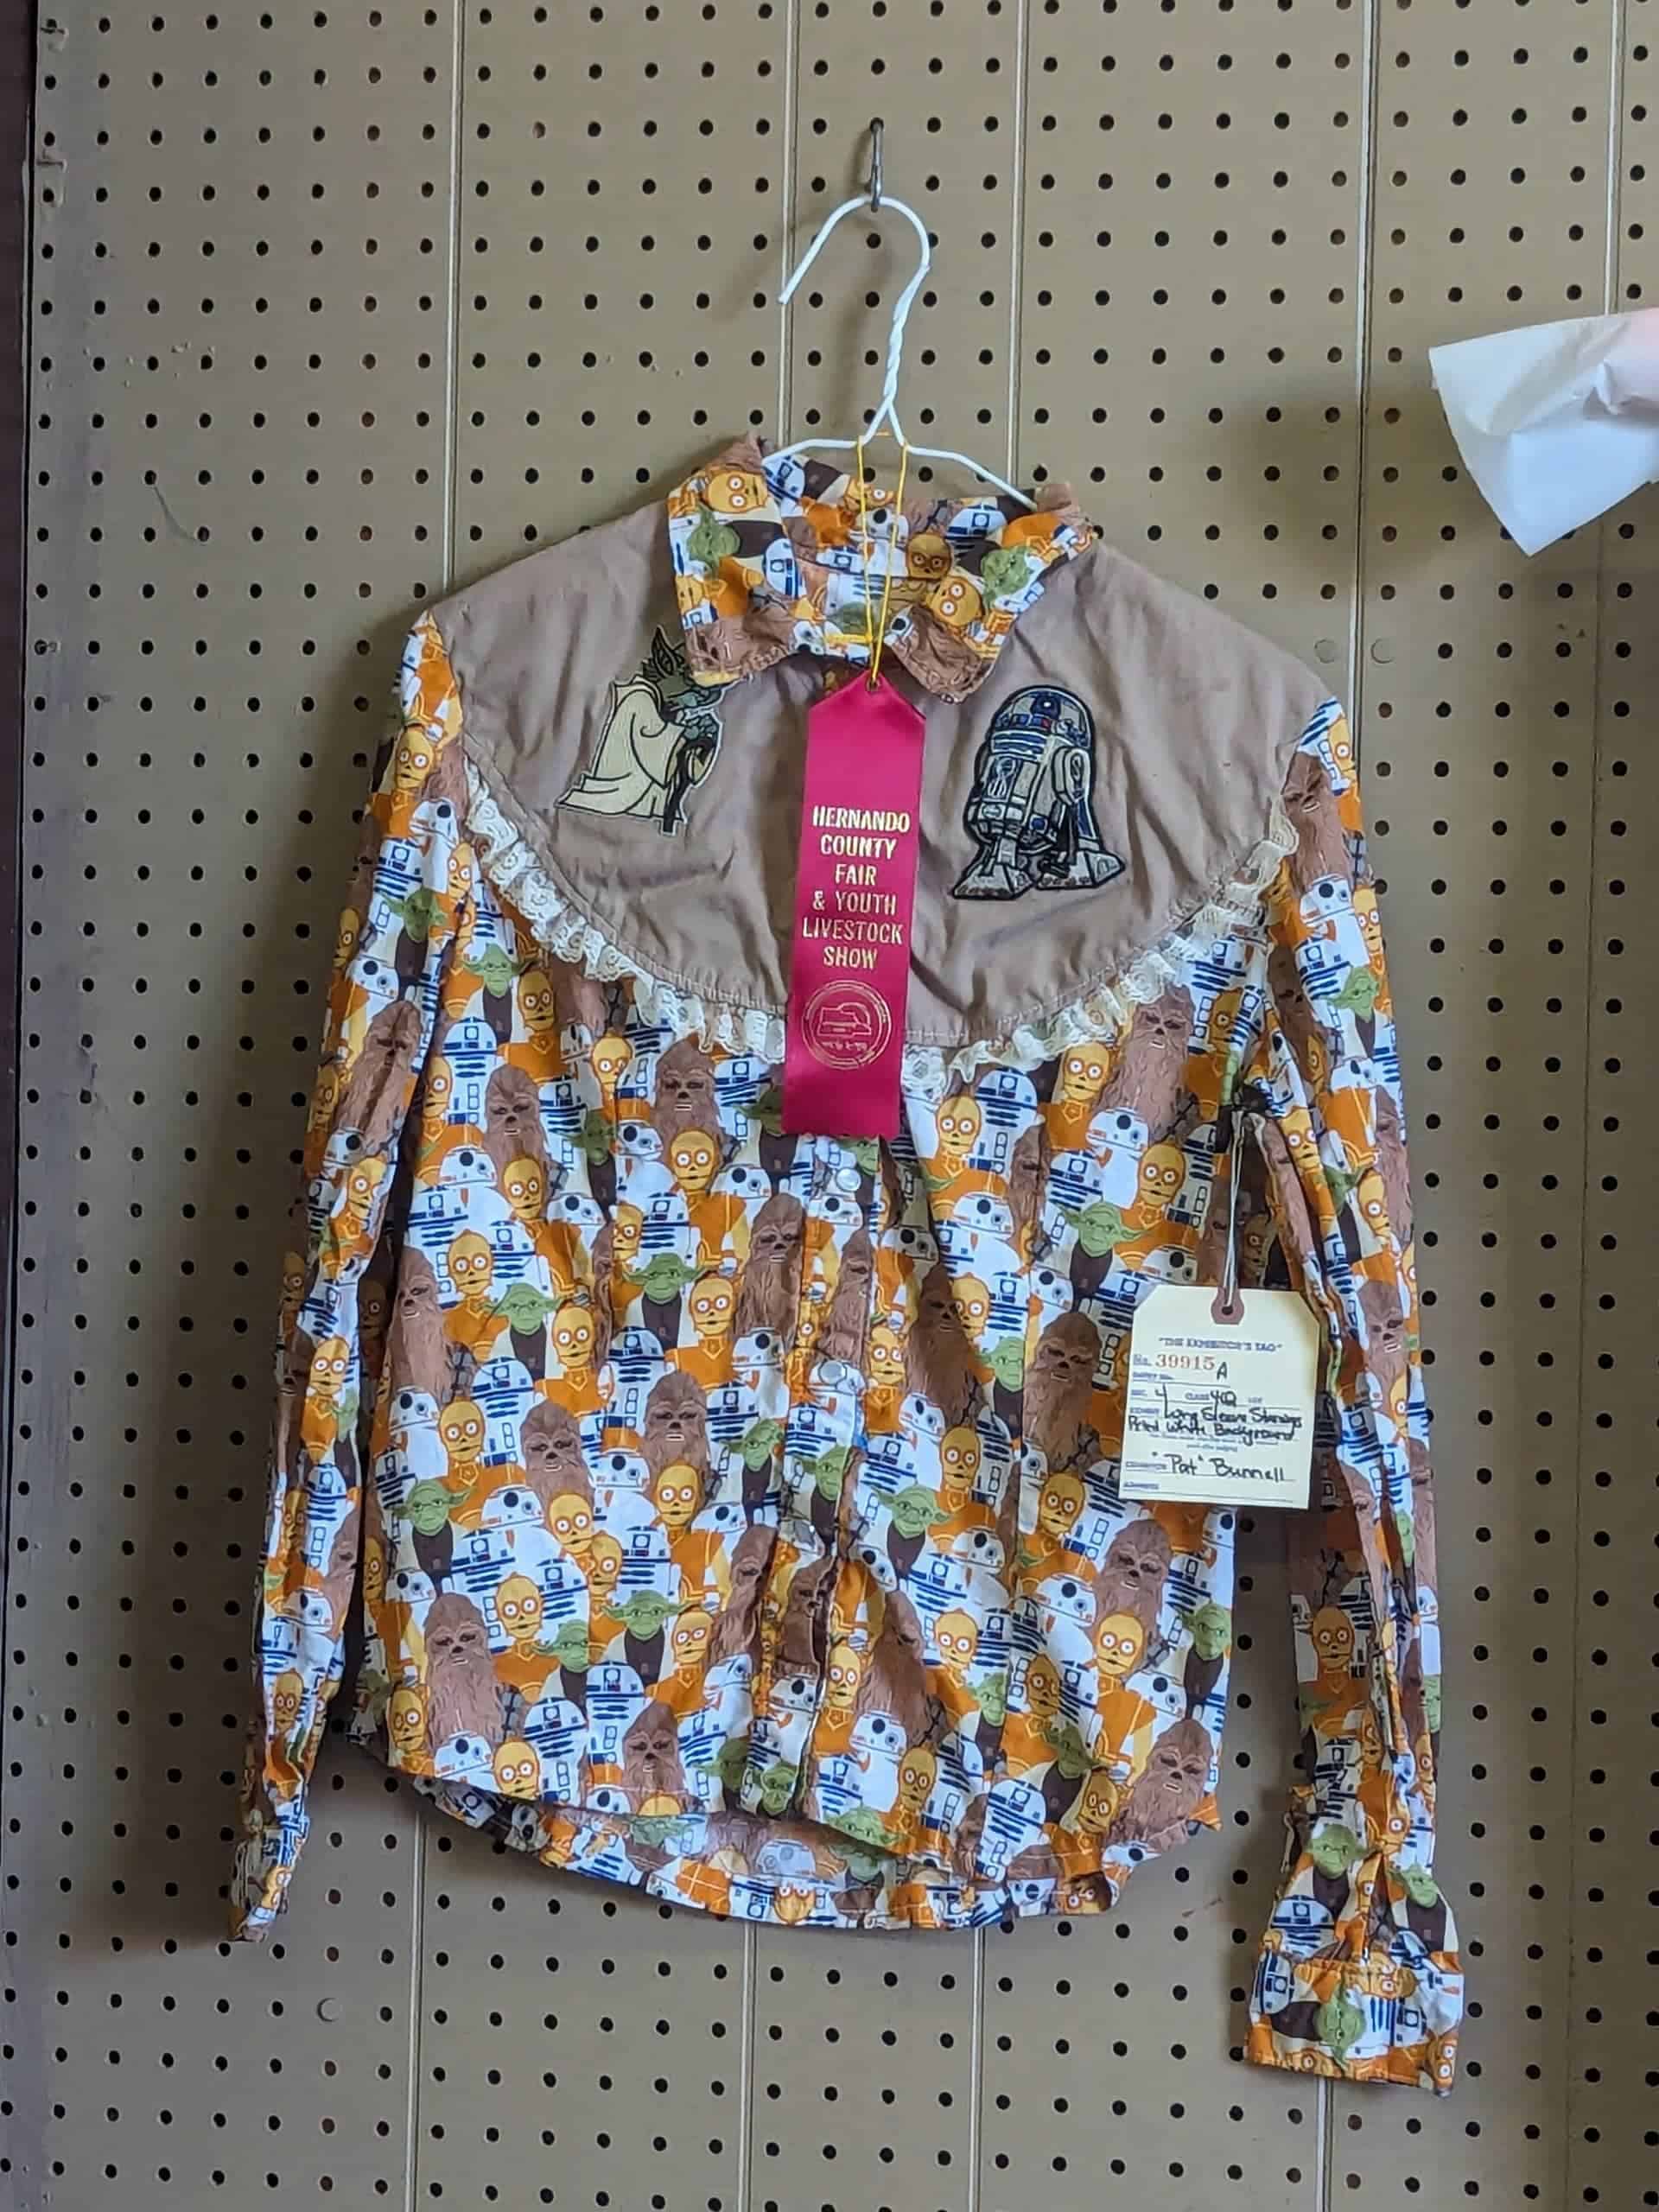 Quilted Star Wars long sleeve shirt by Pat Bunnell